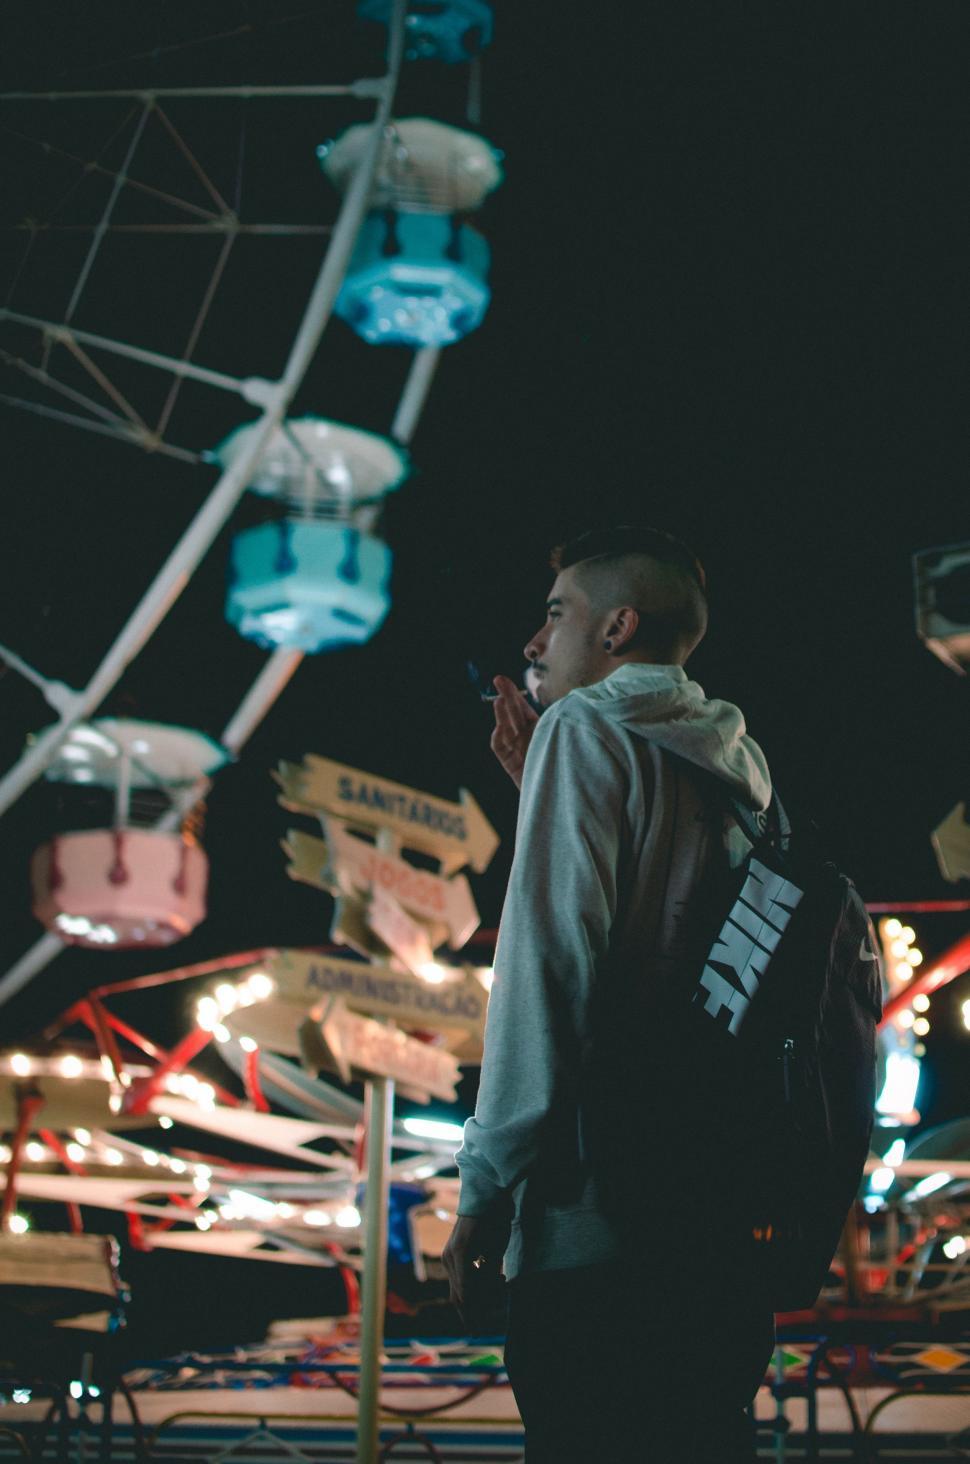 Free Image of Man Standing in Front of Ferris Wheel at Night 